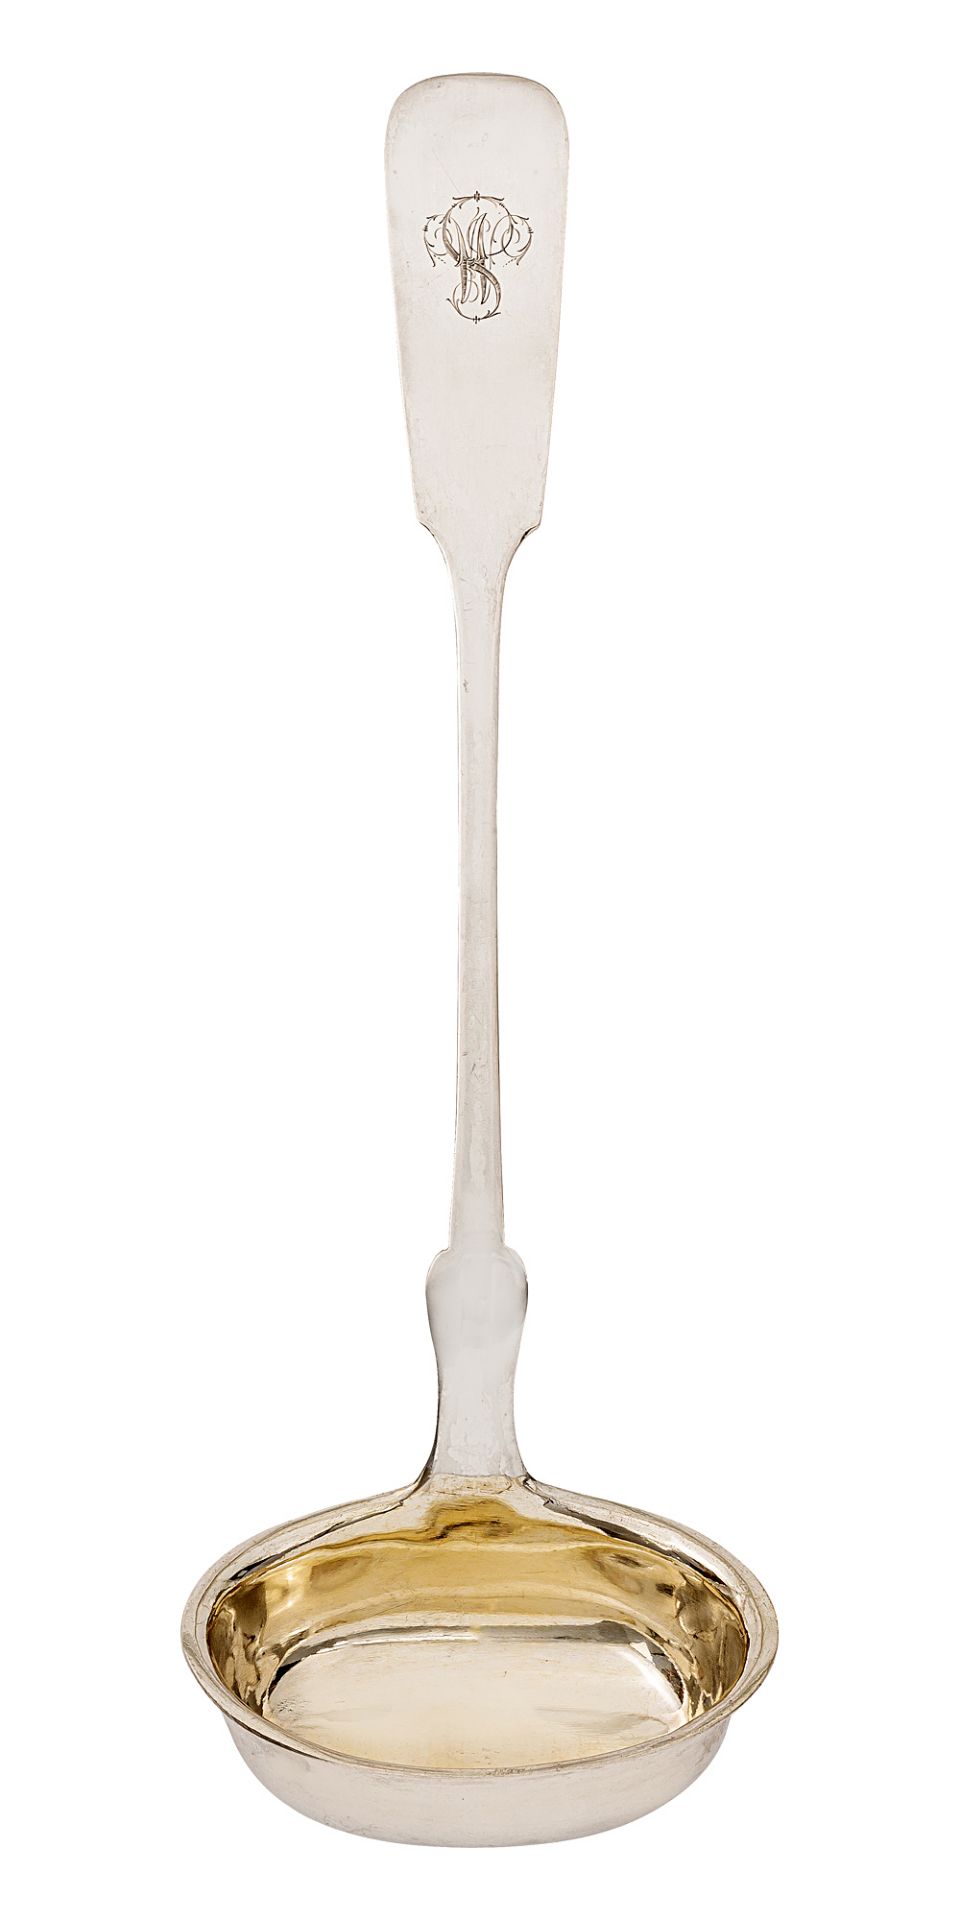 Soup ladle with ligated monogram